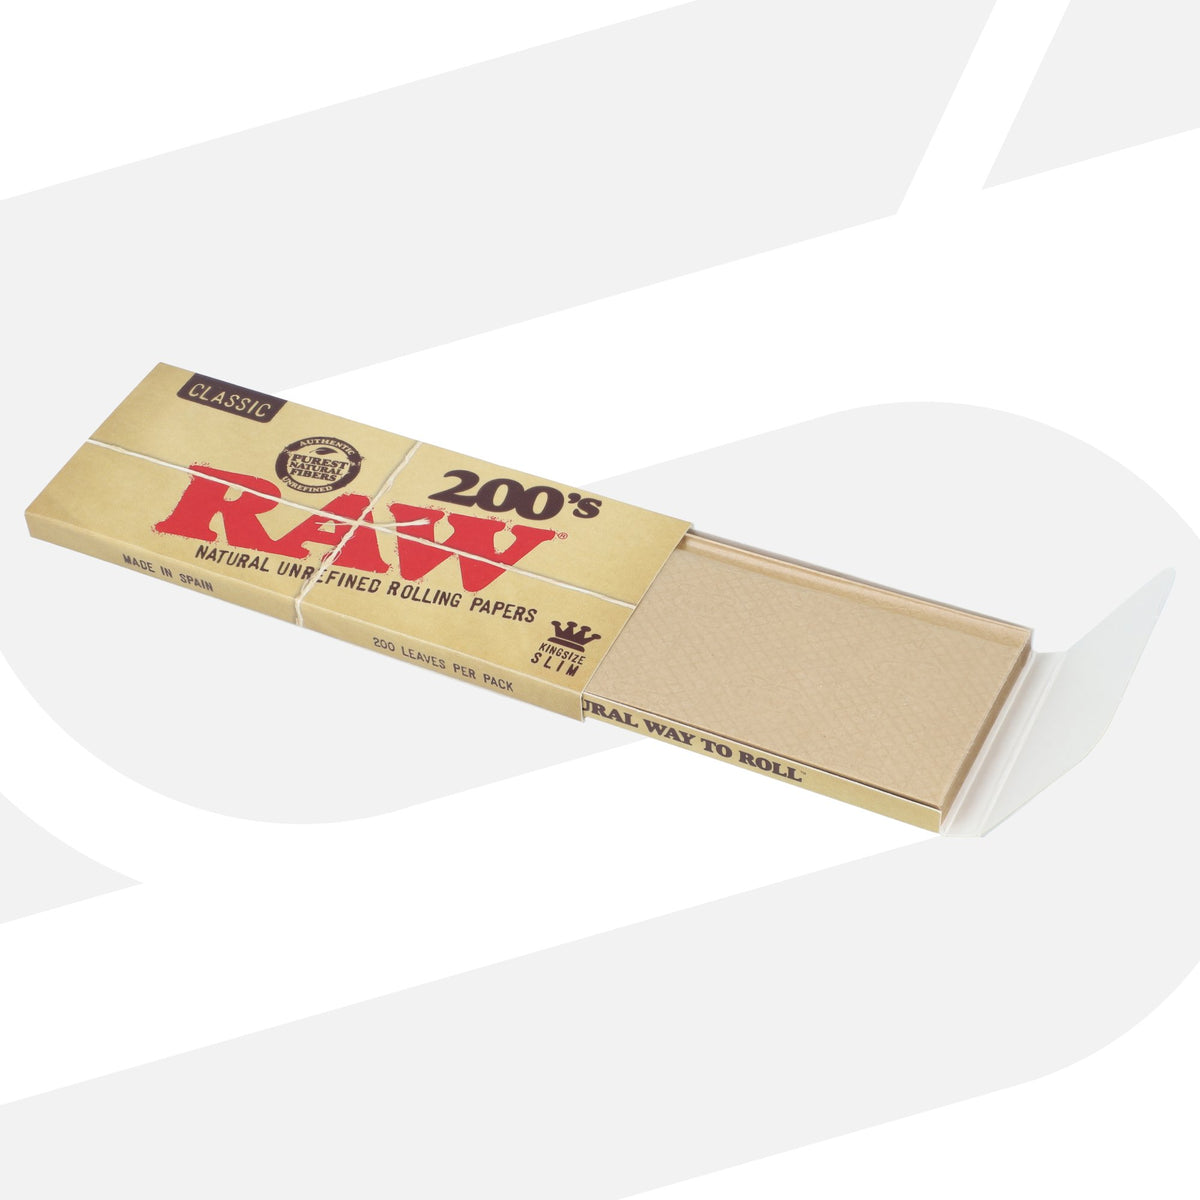 RAW Classic Creaseless King Size Slim Rolling Papers - 200 Rolling Papers WAR00325-1/40 esd-official